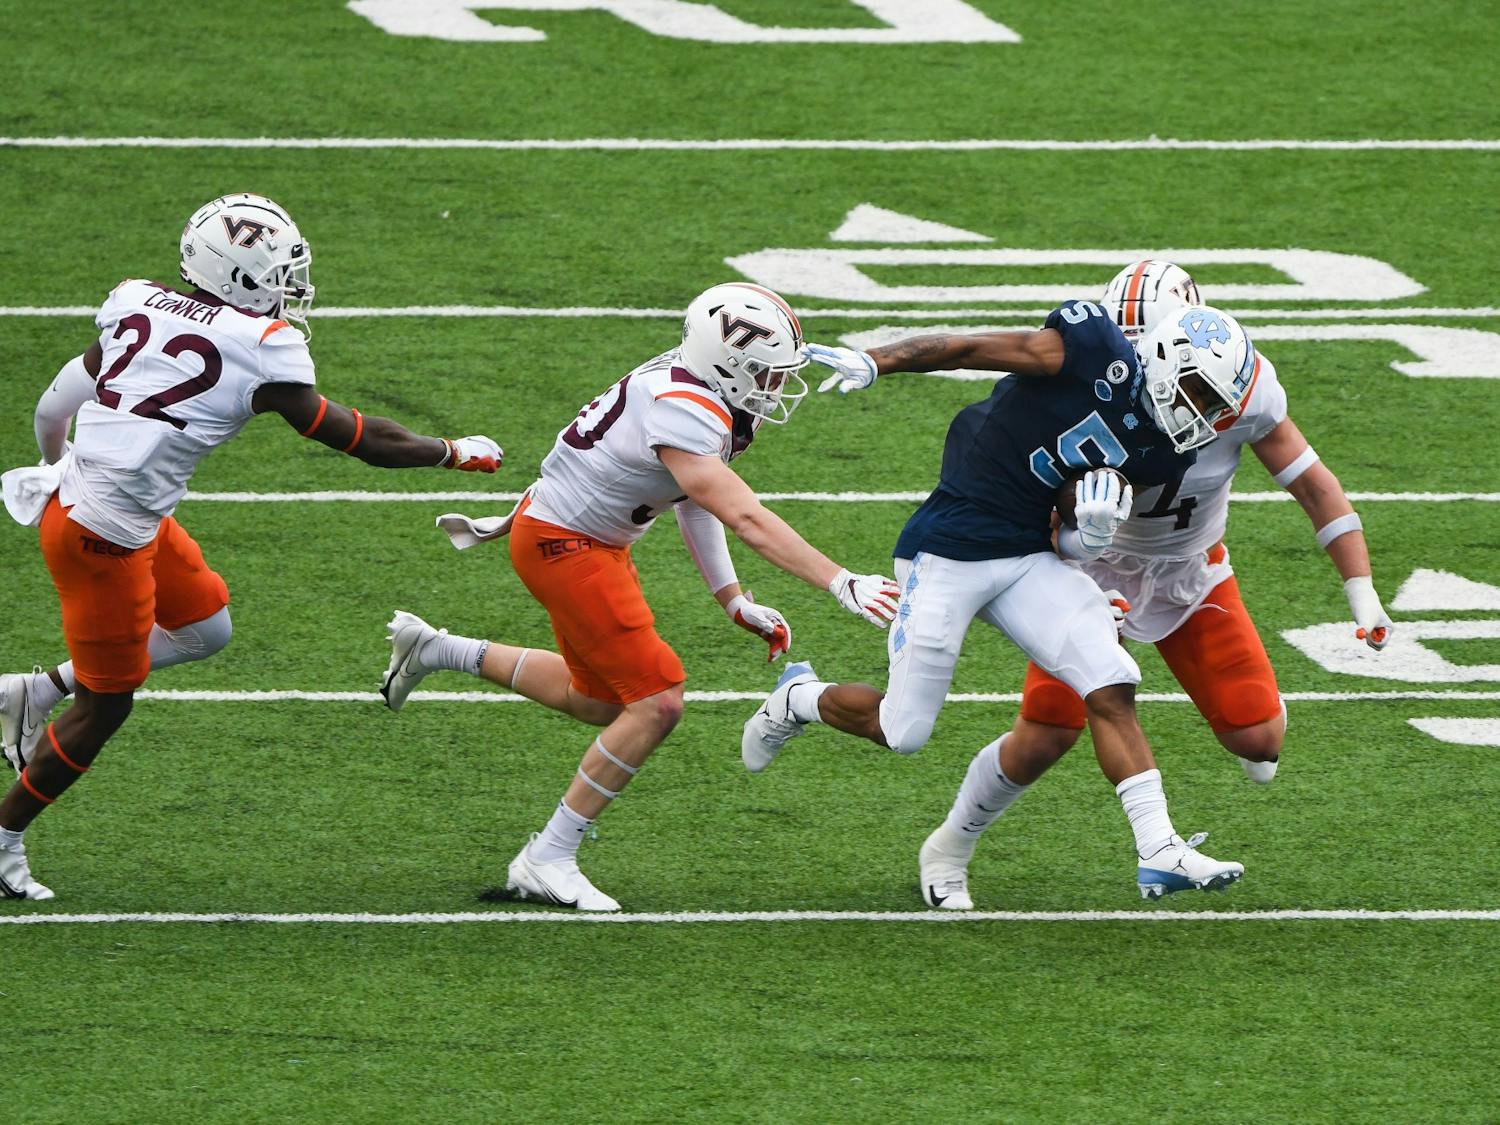 UNC senior wide reciever Dazz Newsome (5) attempts to run past members of Virginia Tech's defensive line during a game in Kenan Memorial Stadium on Saturday, Oct. 10, 2020. UNC beat Virginia Tech 56-45.